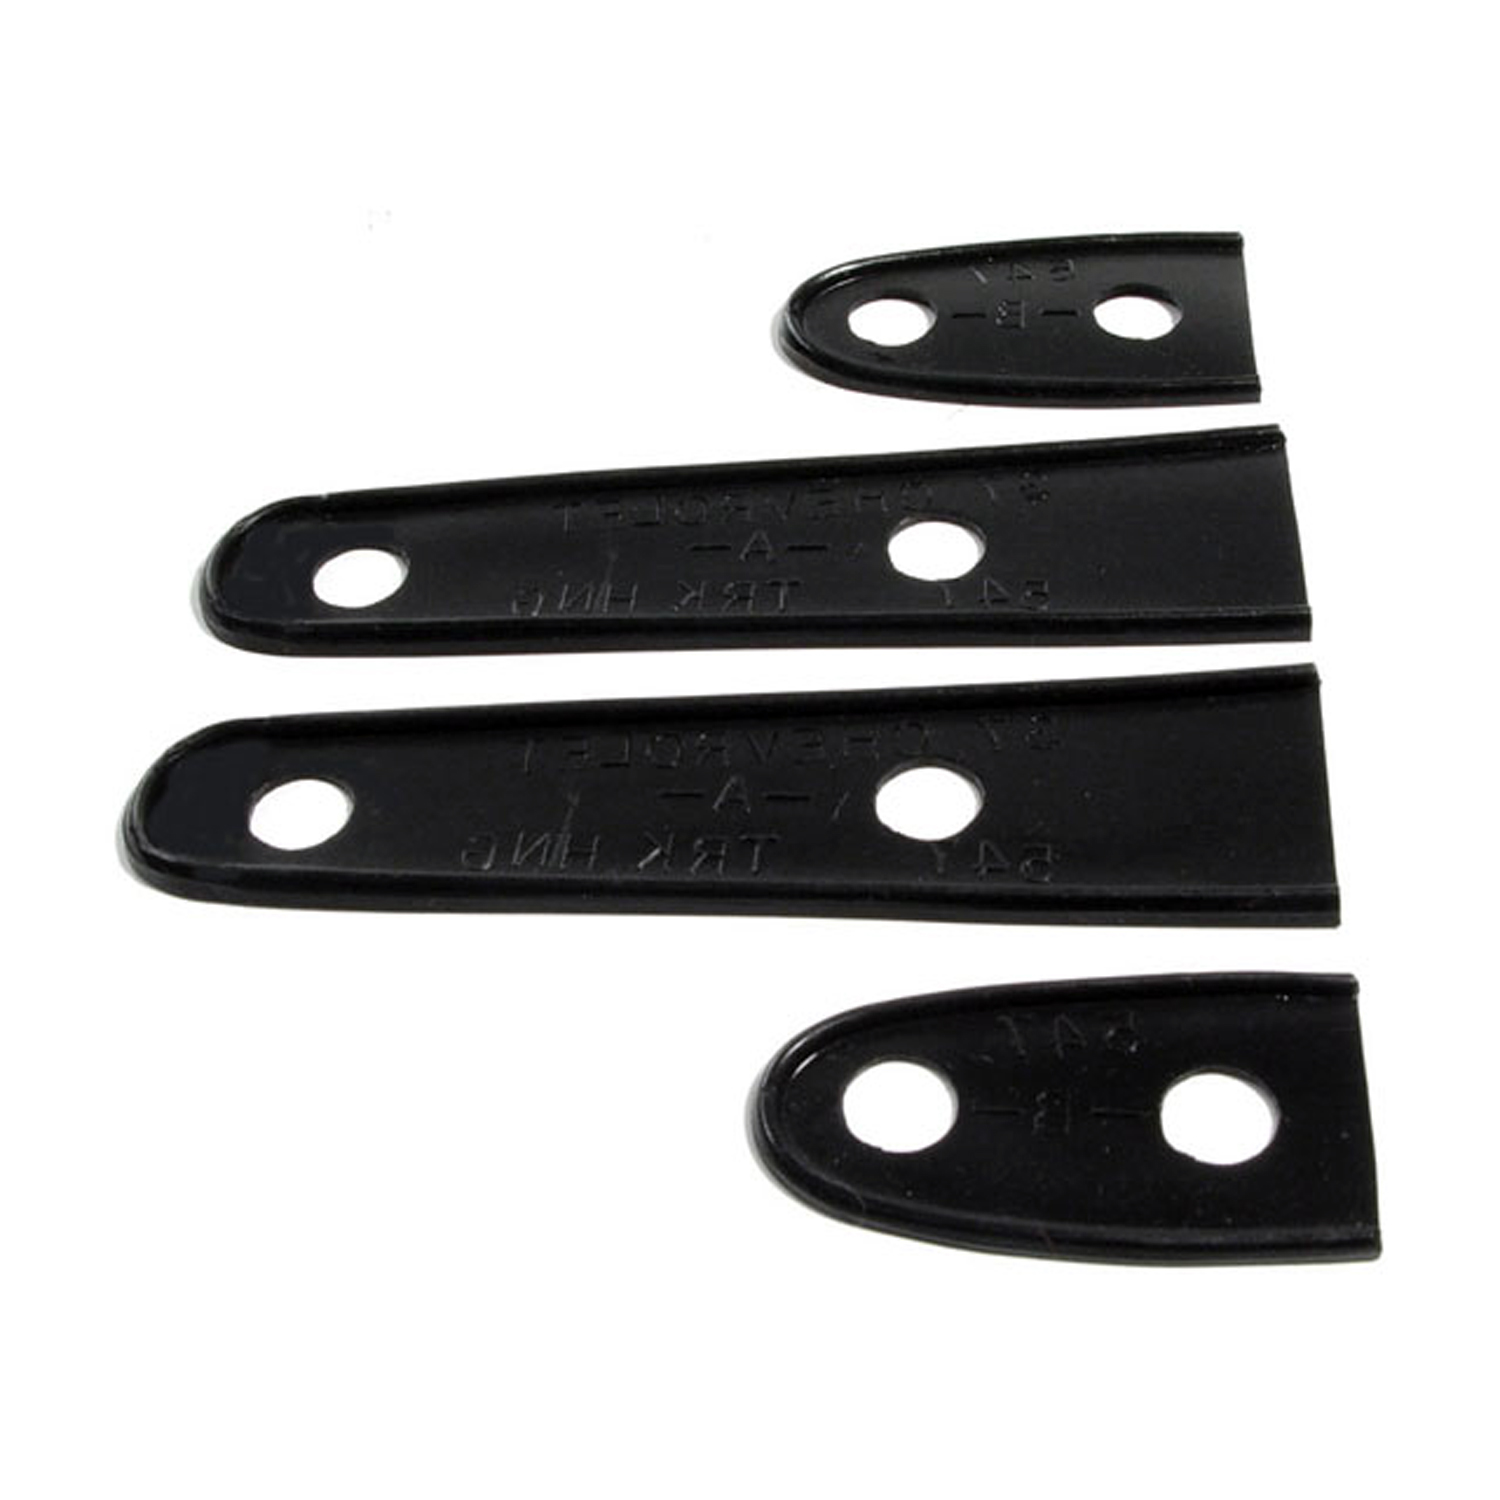 1937 Chevrolet Master Trunk Hinge Pads.  1-3/8 wide X 7-3/4 long.  4-Piece Set-MP 547